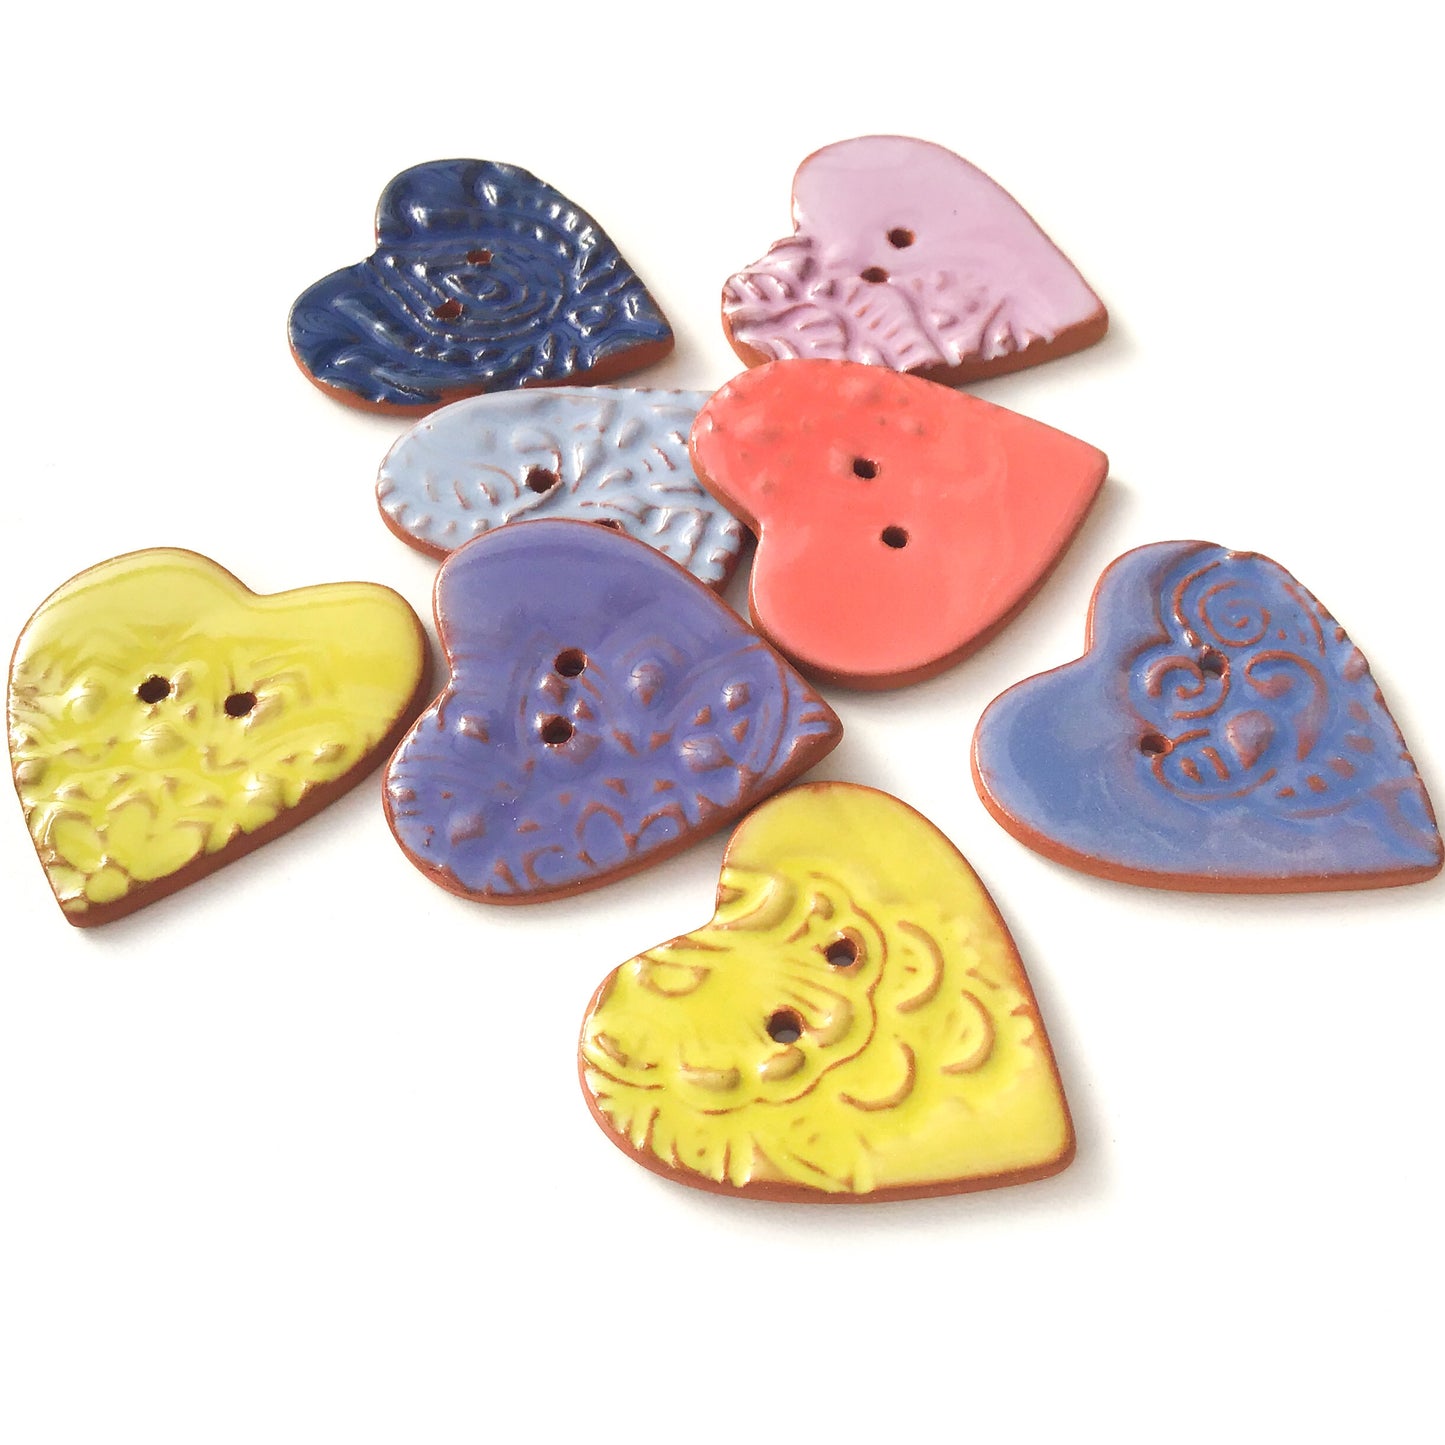 Large Stamped Heart Buttons - Soft Tones Ceramic Heart Buttons - 1 3/8"